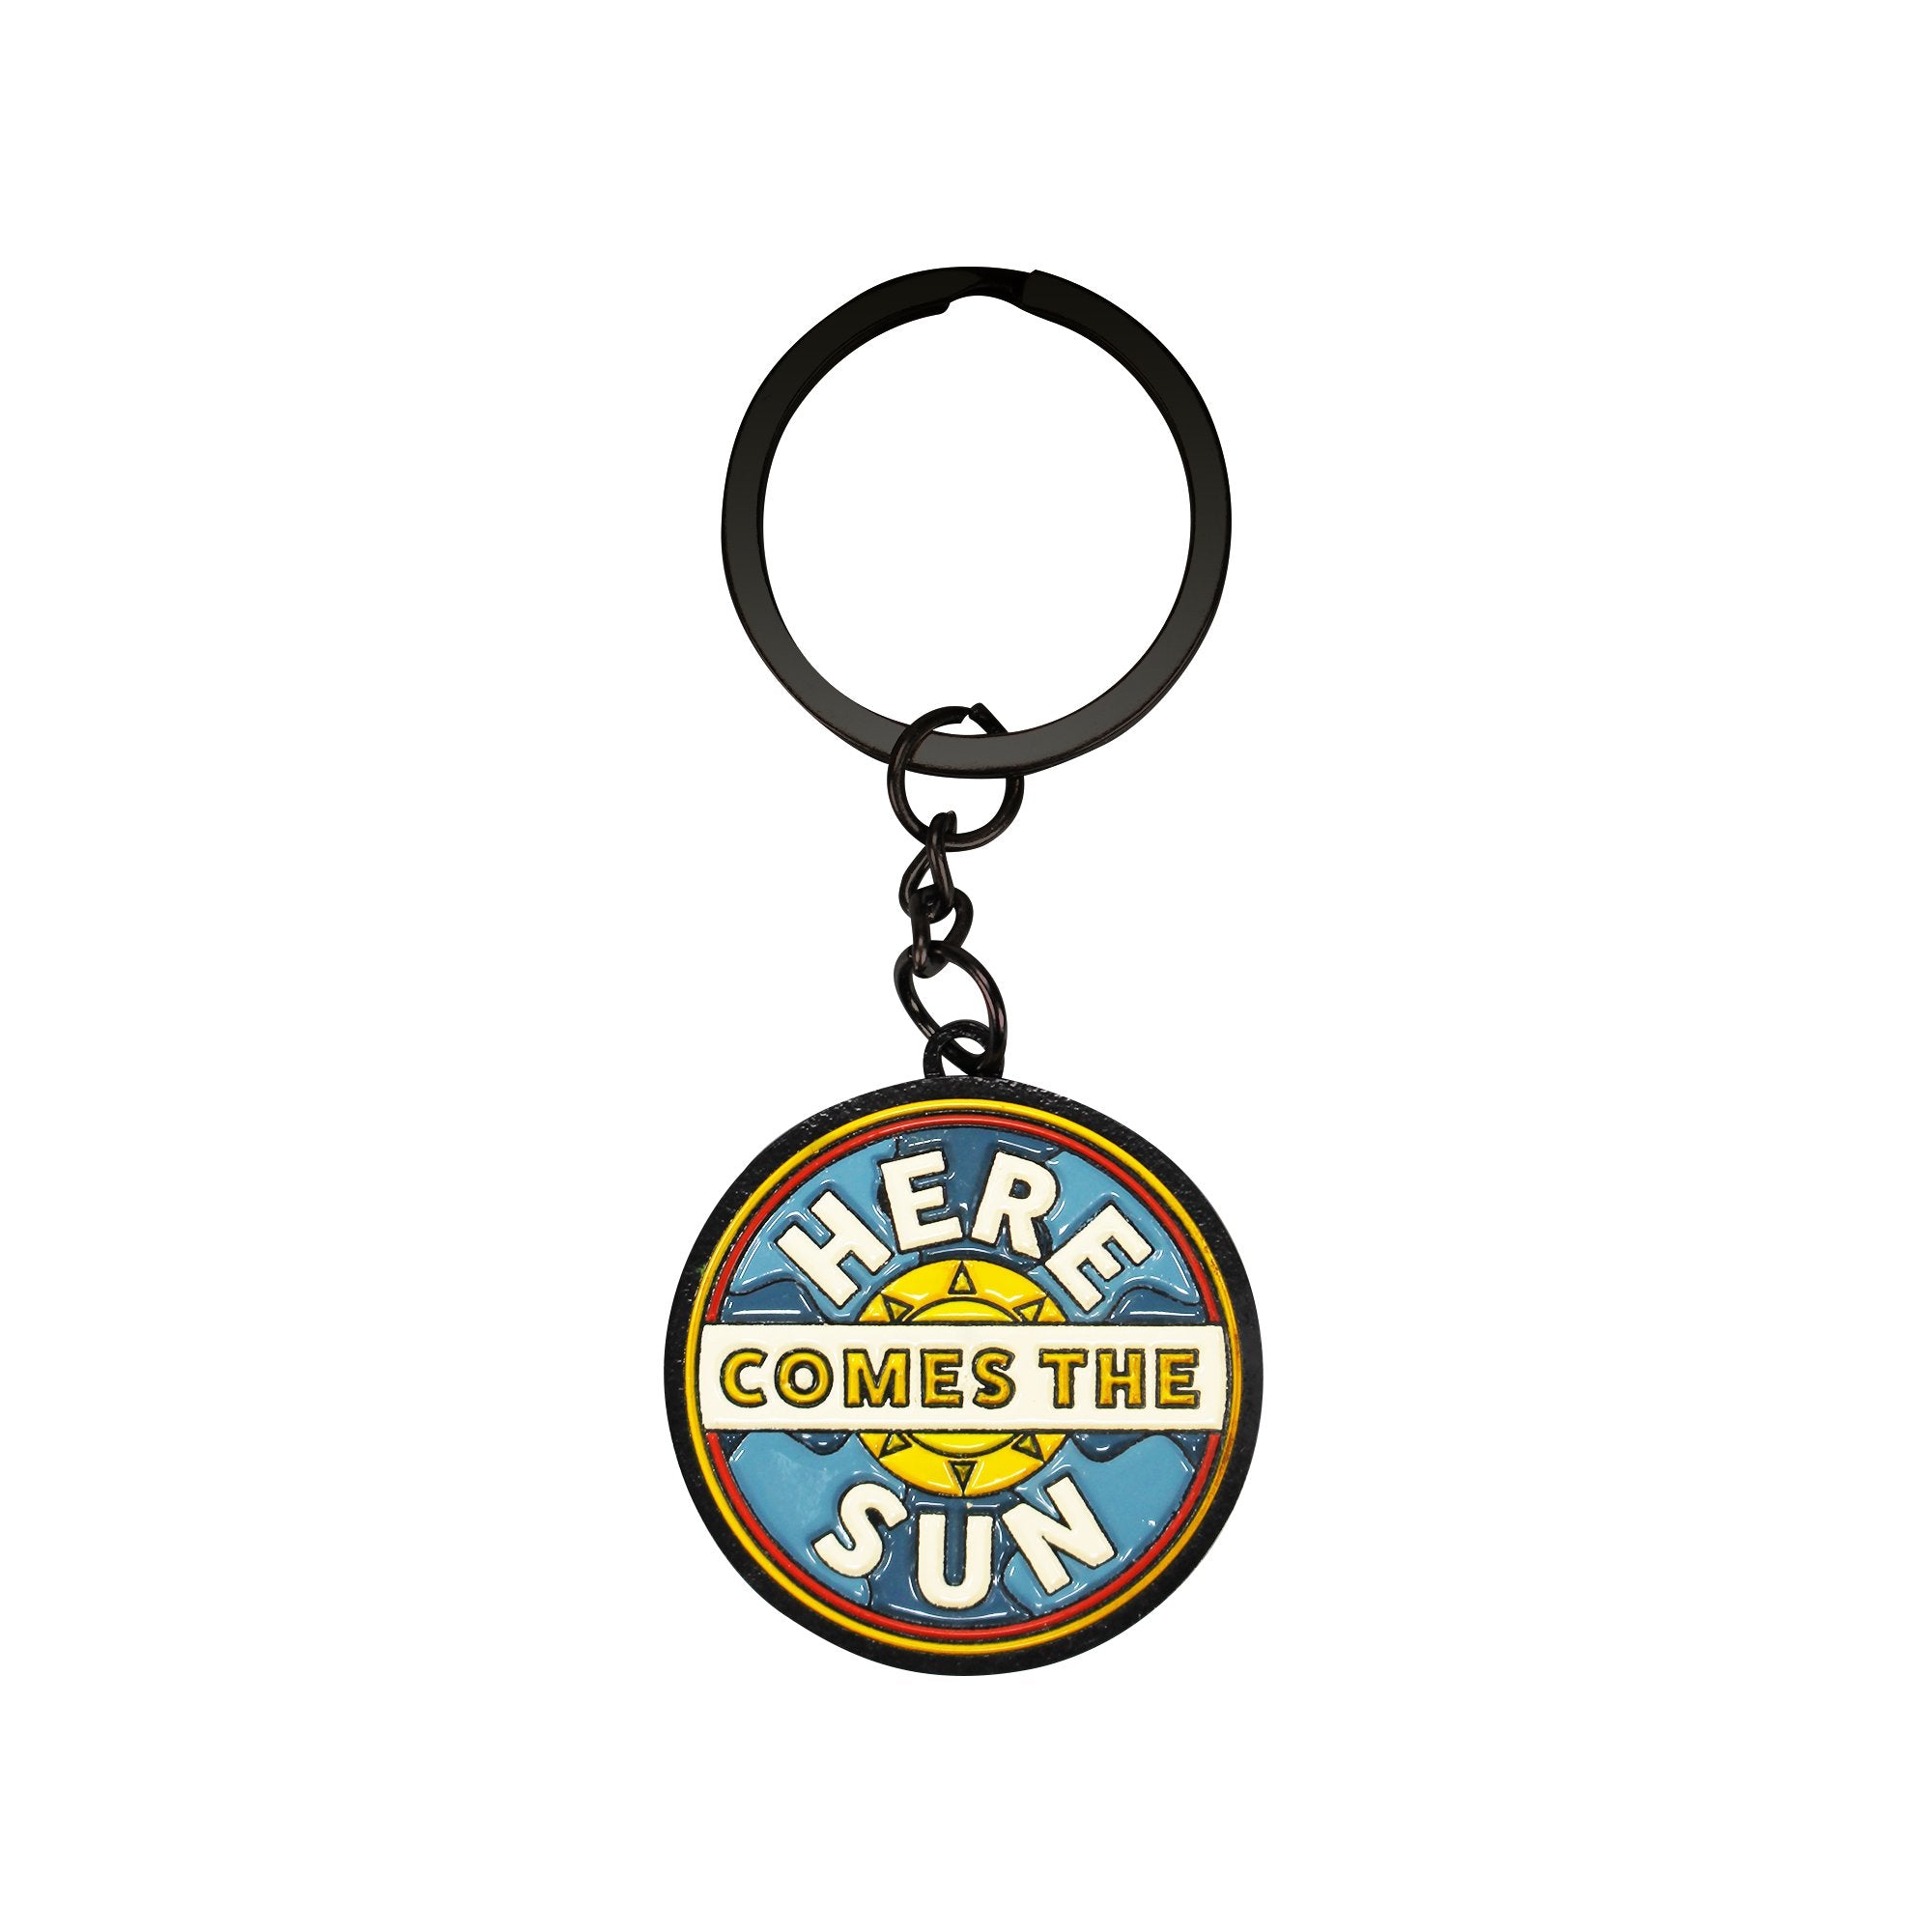 Keyring Metal - The Beatles (Here Comes the Sun)